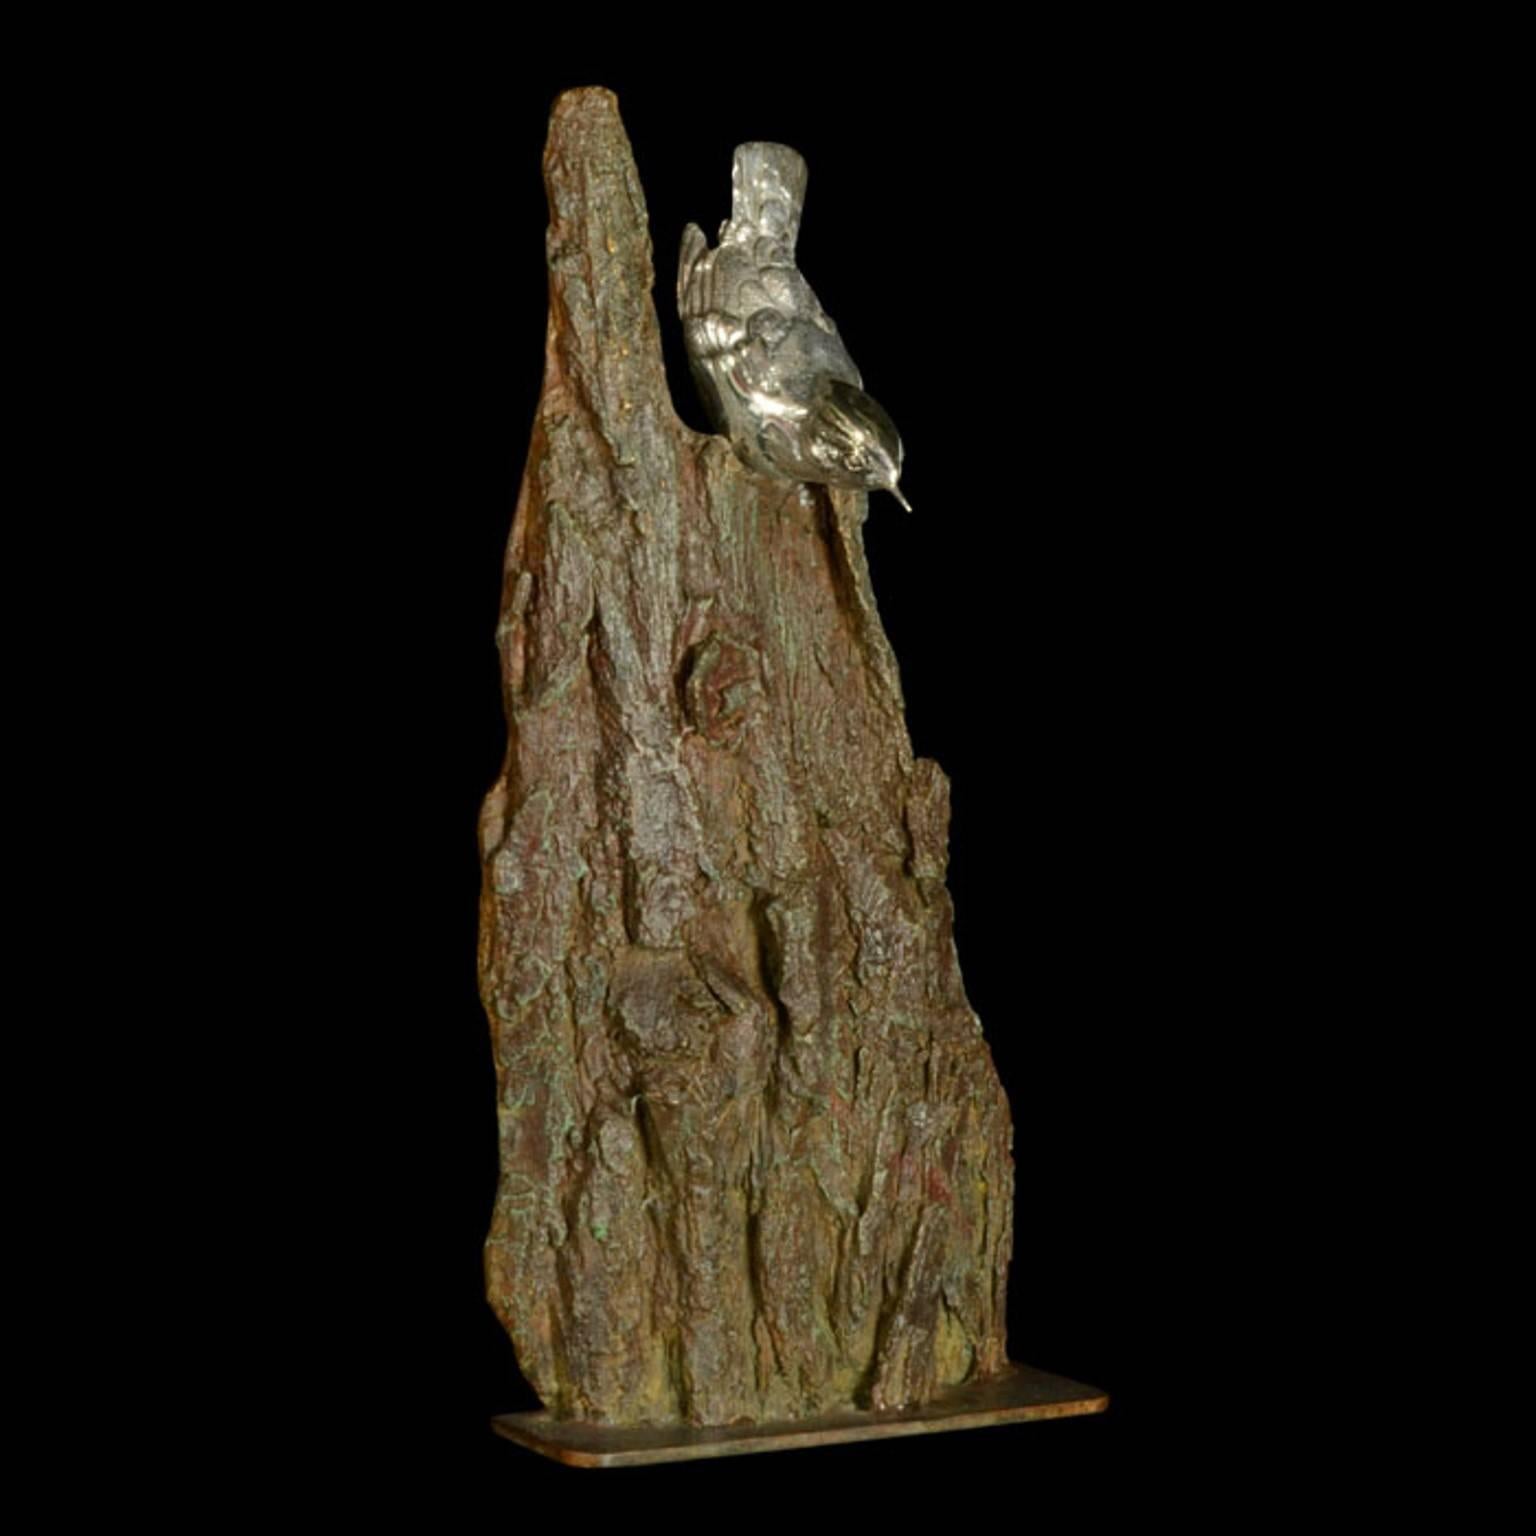 Ian Bowles Figurative Sculpture - 'Nuthatch on Bark' Limited Edition Sterling Silver/Bronze Sculpture by Ian Bowle